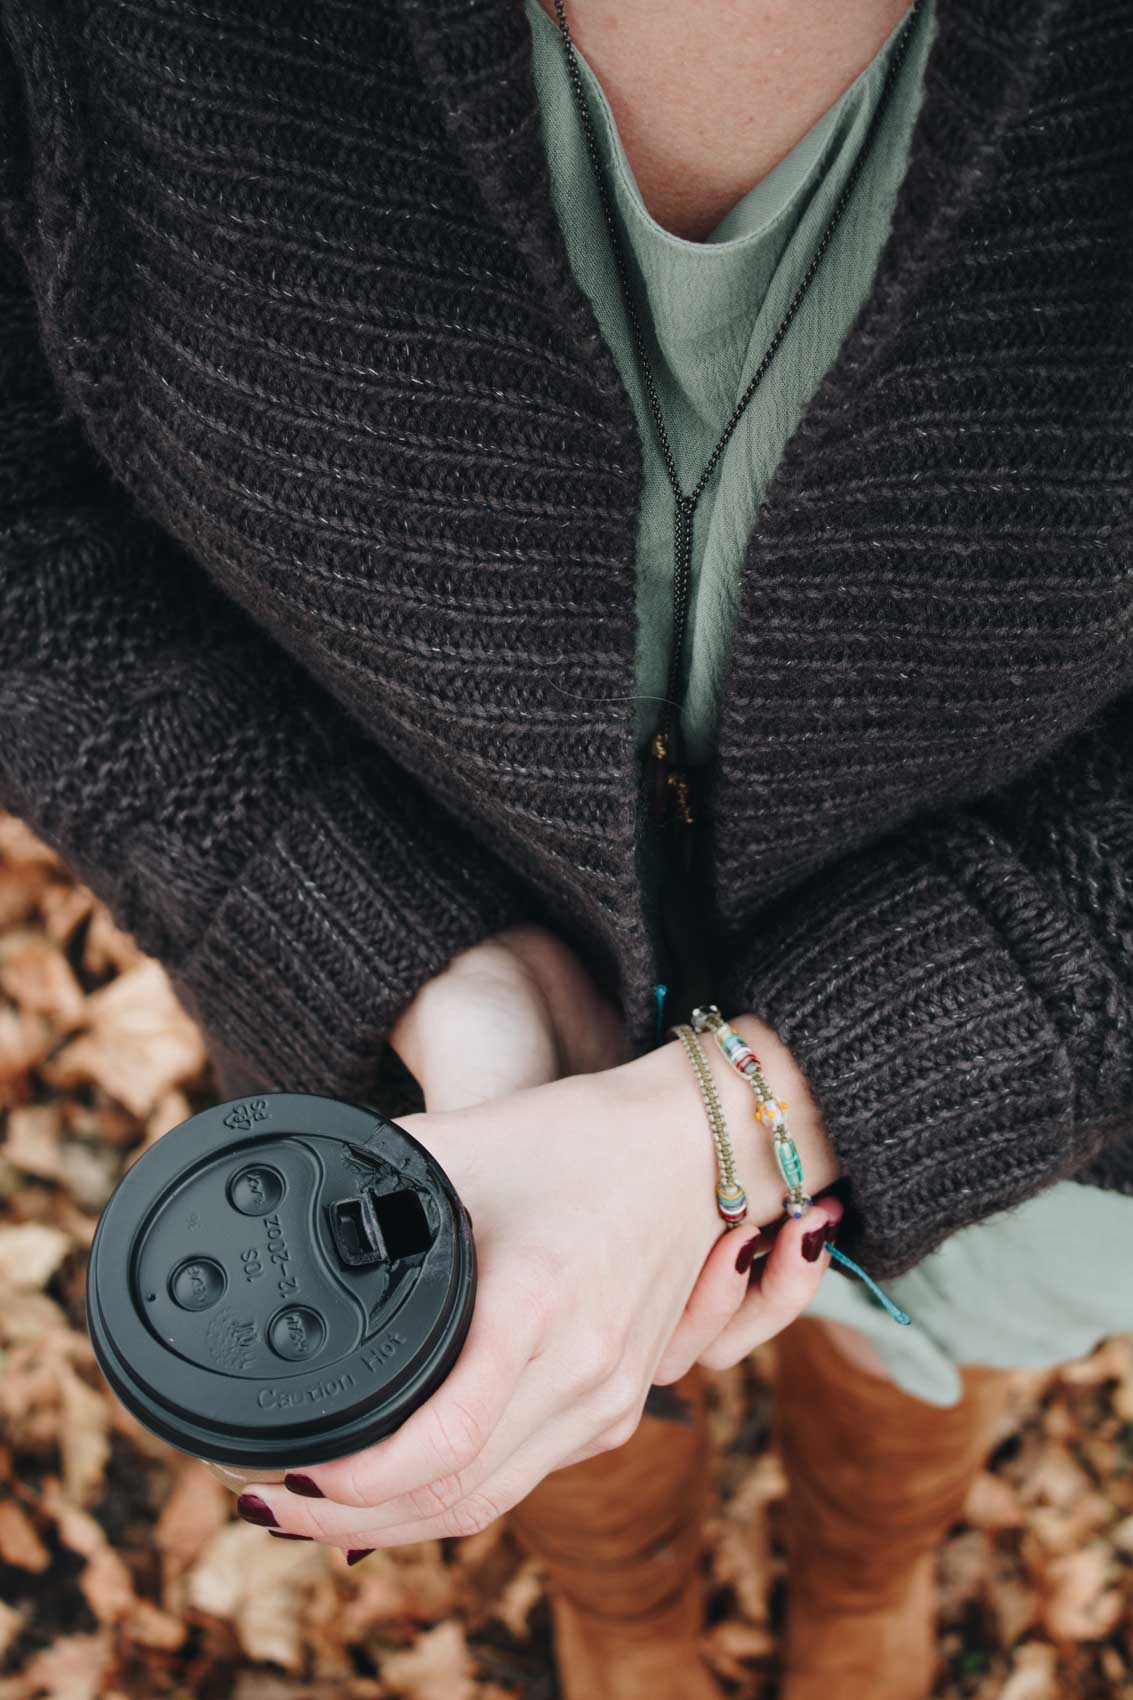 As a sufferer of depression, I realize that showing love and compassion is not always quite as easy as it sounds. Living in a city where you can experience all four seasons in one day, sometimes the little things matter most, like the beautiful Seeds of Love Bracelets I paired with my winter outfit.